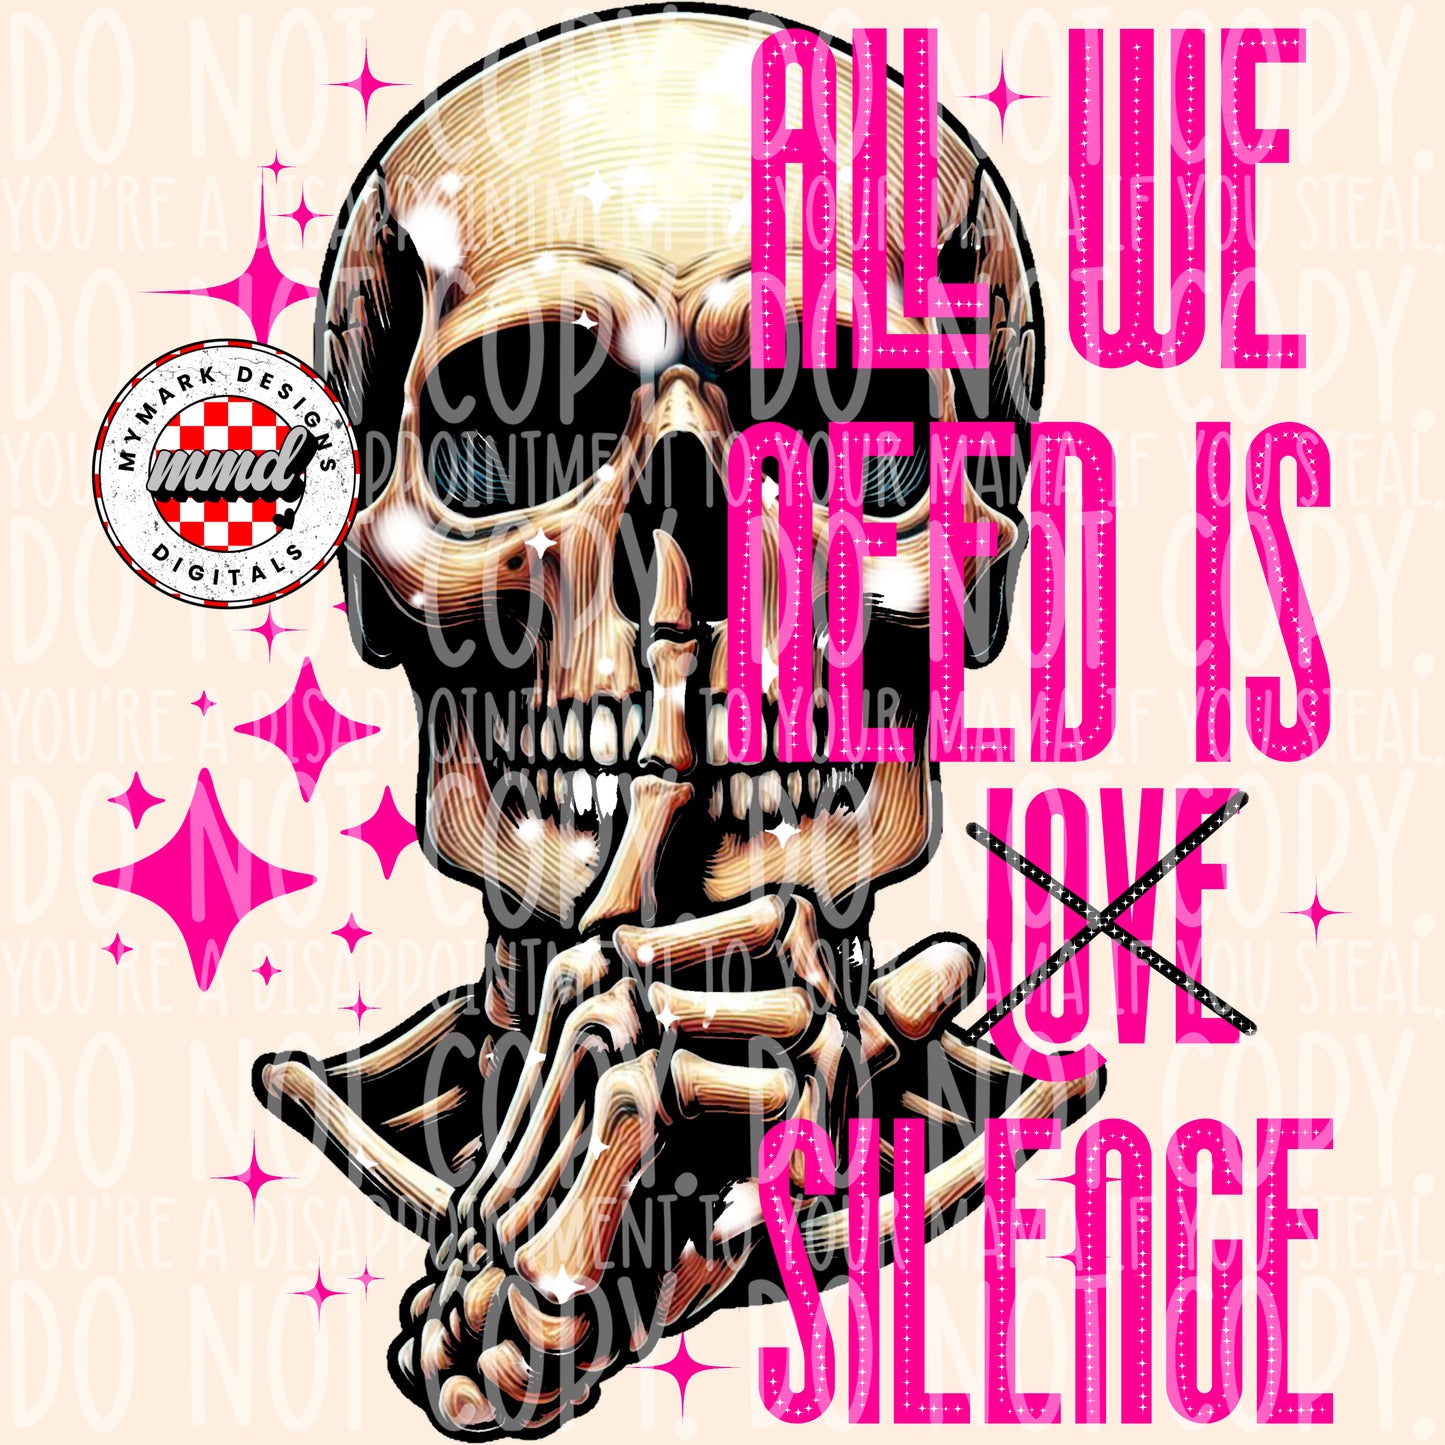 All We Need is Love(Silence) : PNG